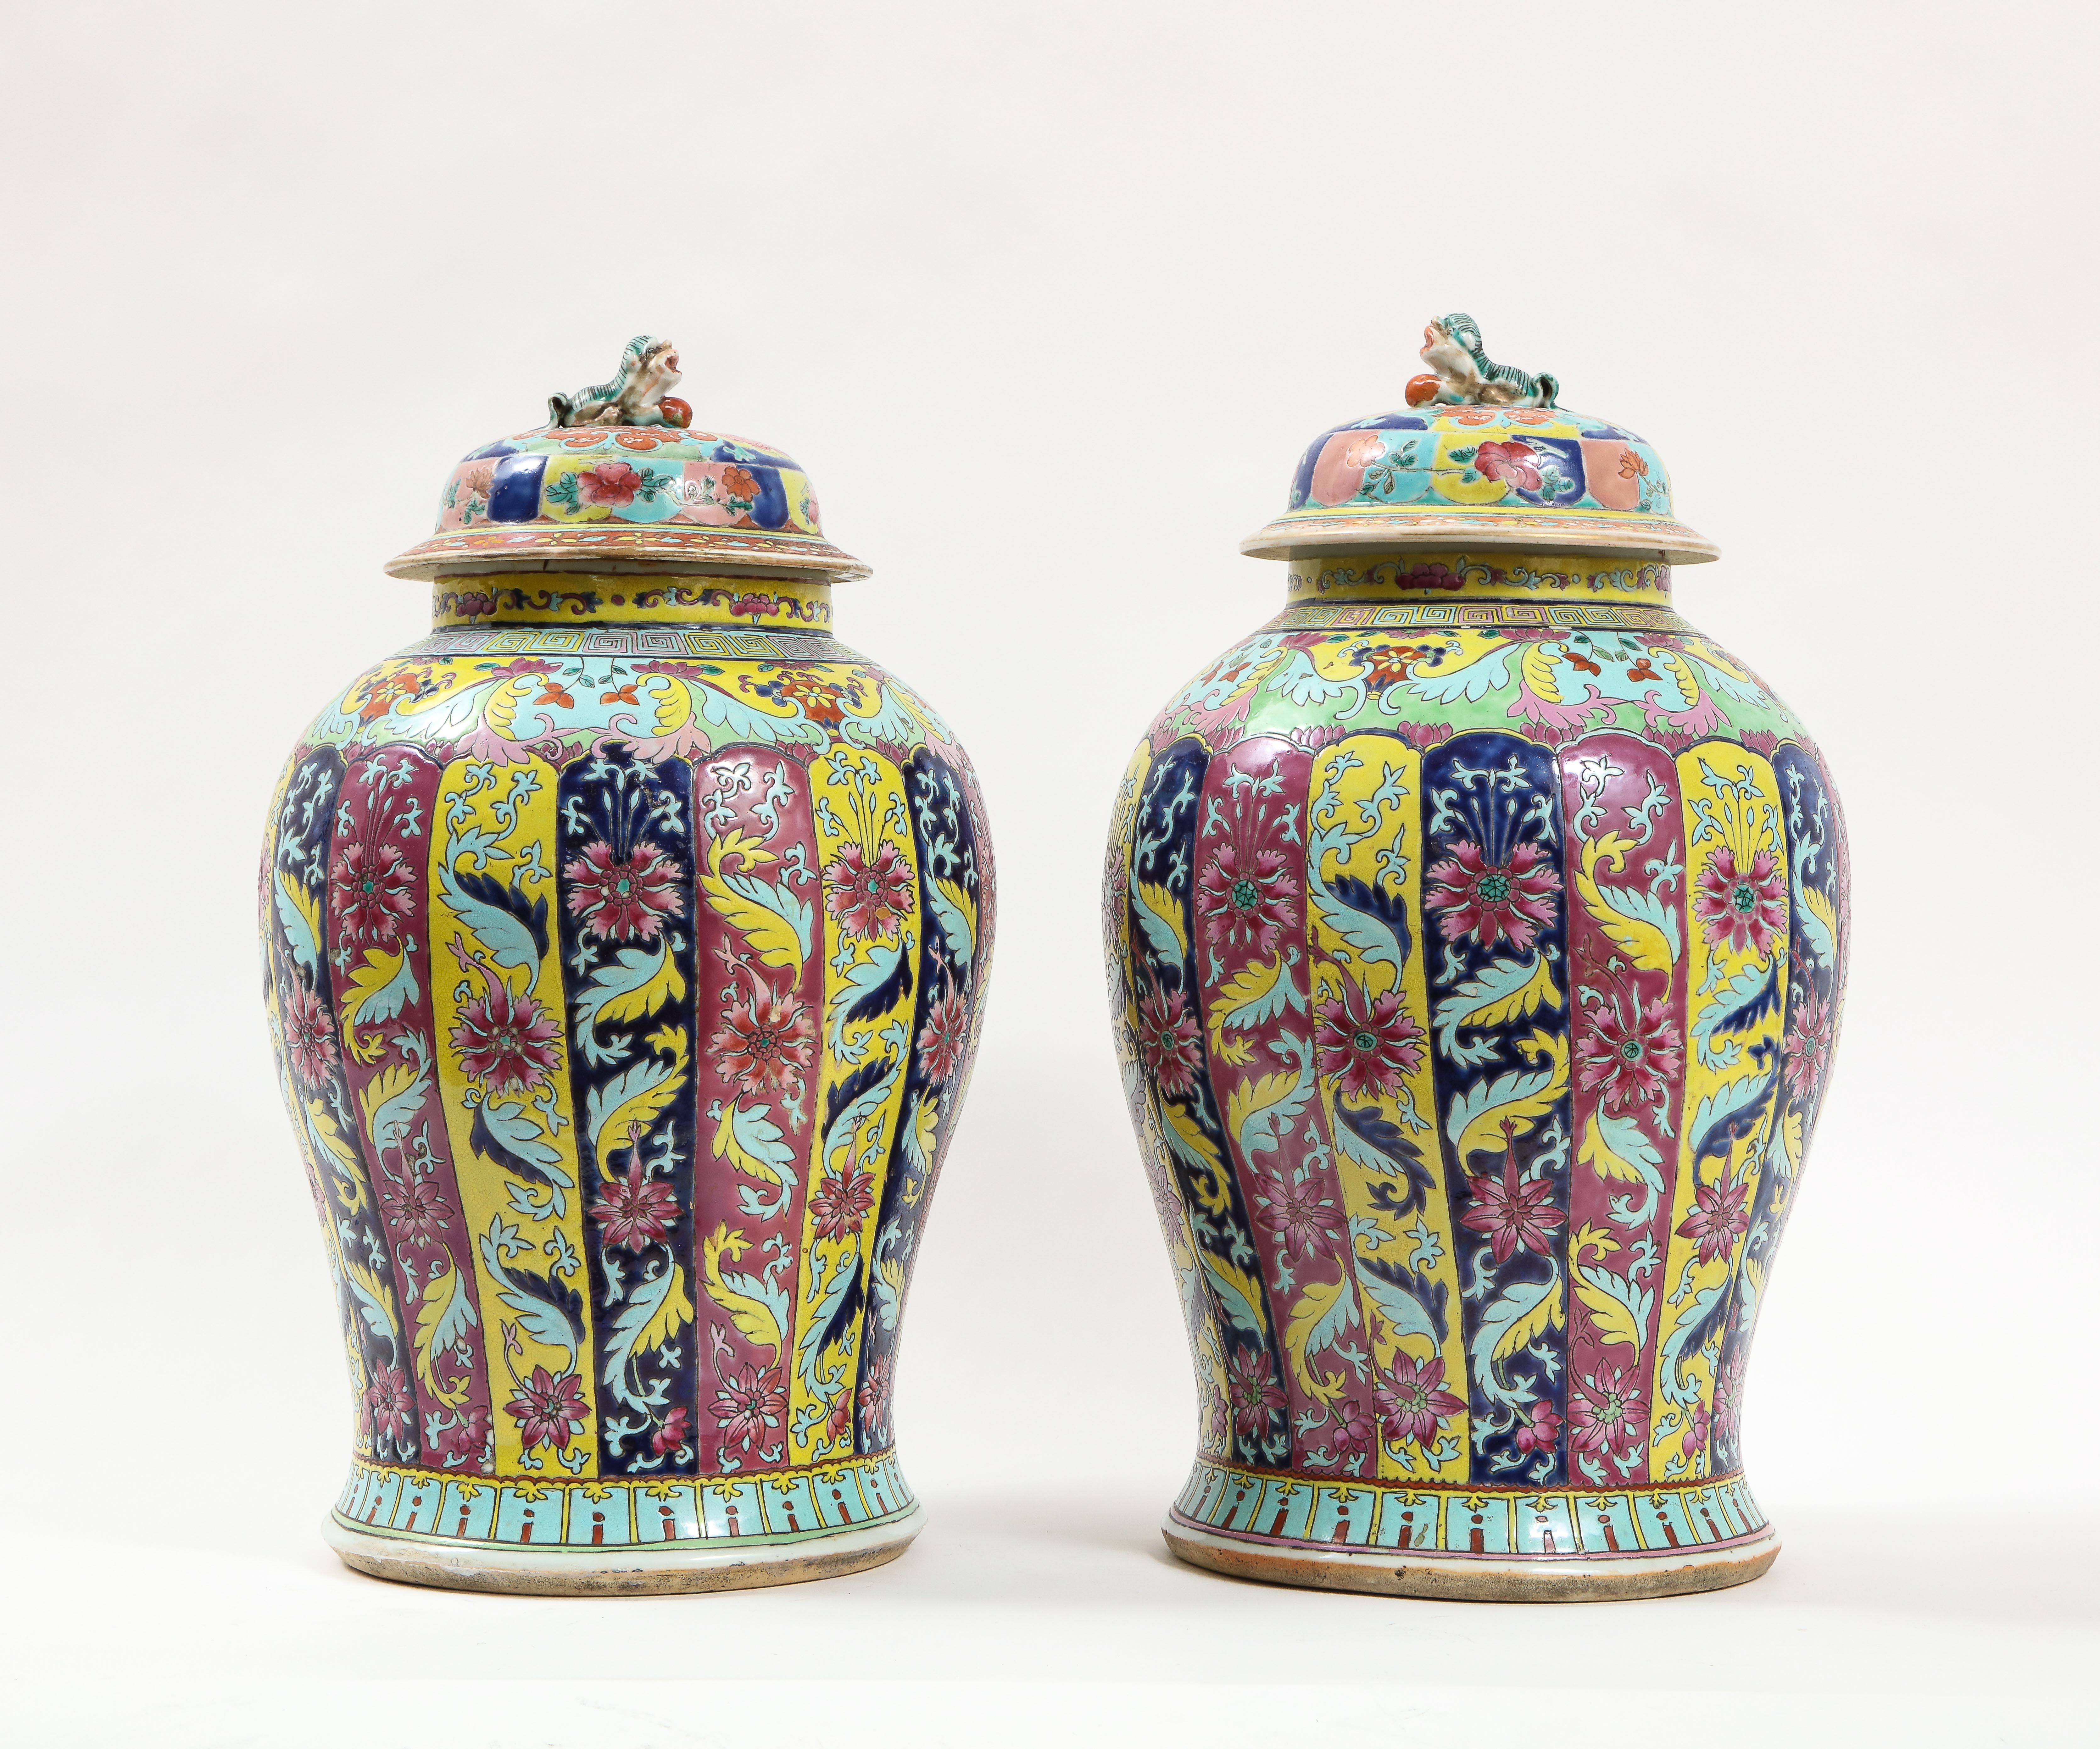 A gorgeous pair of Chinese 19th century Famille rose Baluster Form covered vases, from the Collection of Henry Ford. Each vase is beautifully hand-enameled with a gorgeous array of colors, which include pink, turquoise, cobalt blue, yellow, orange,